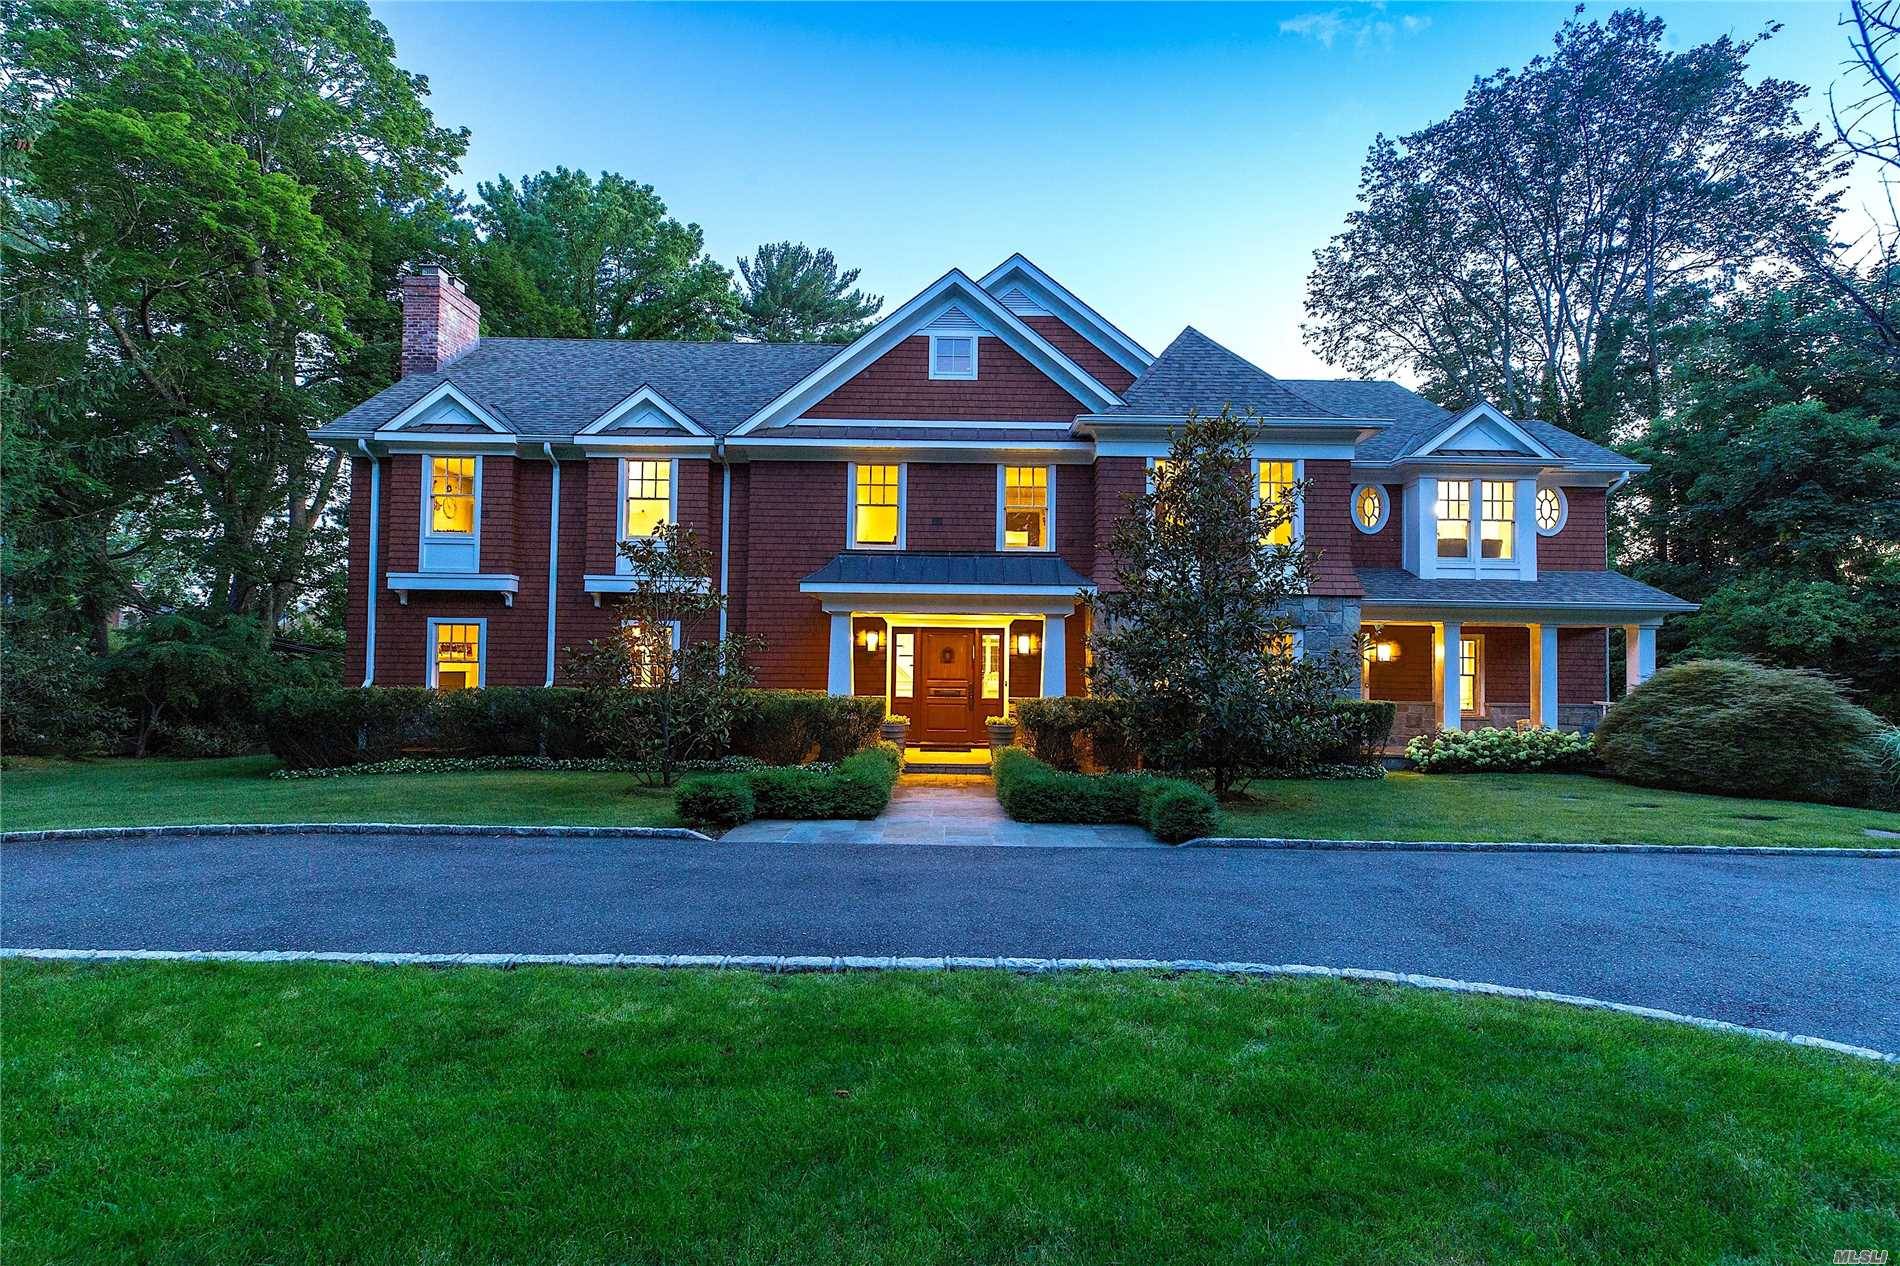 Welcome To This Stunning Stone And Shingle Colonial Home, With Winter Water Views, Situated On Almost 1 Acre Of Property In The Heart Of Prestigious Great Neck Estates.